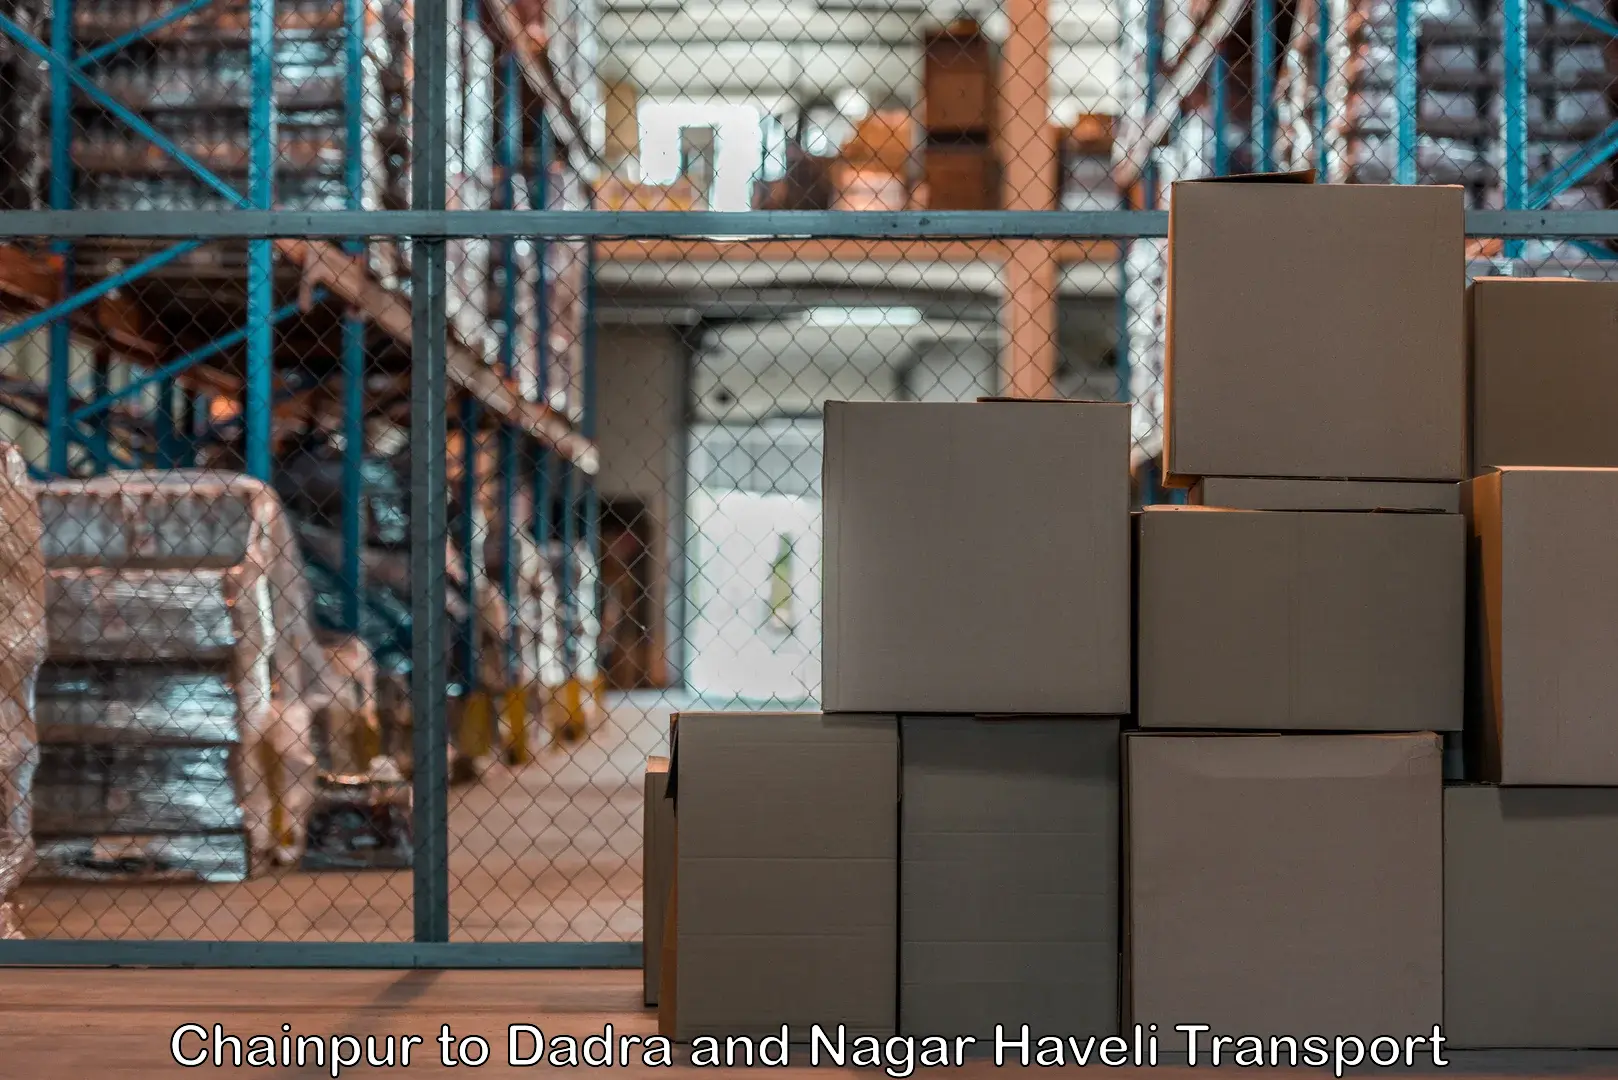 Container transportation services in Chainpur to Dadra and Nagar Haveli